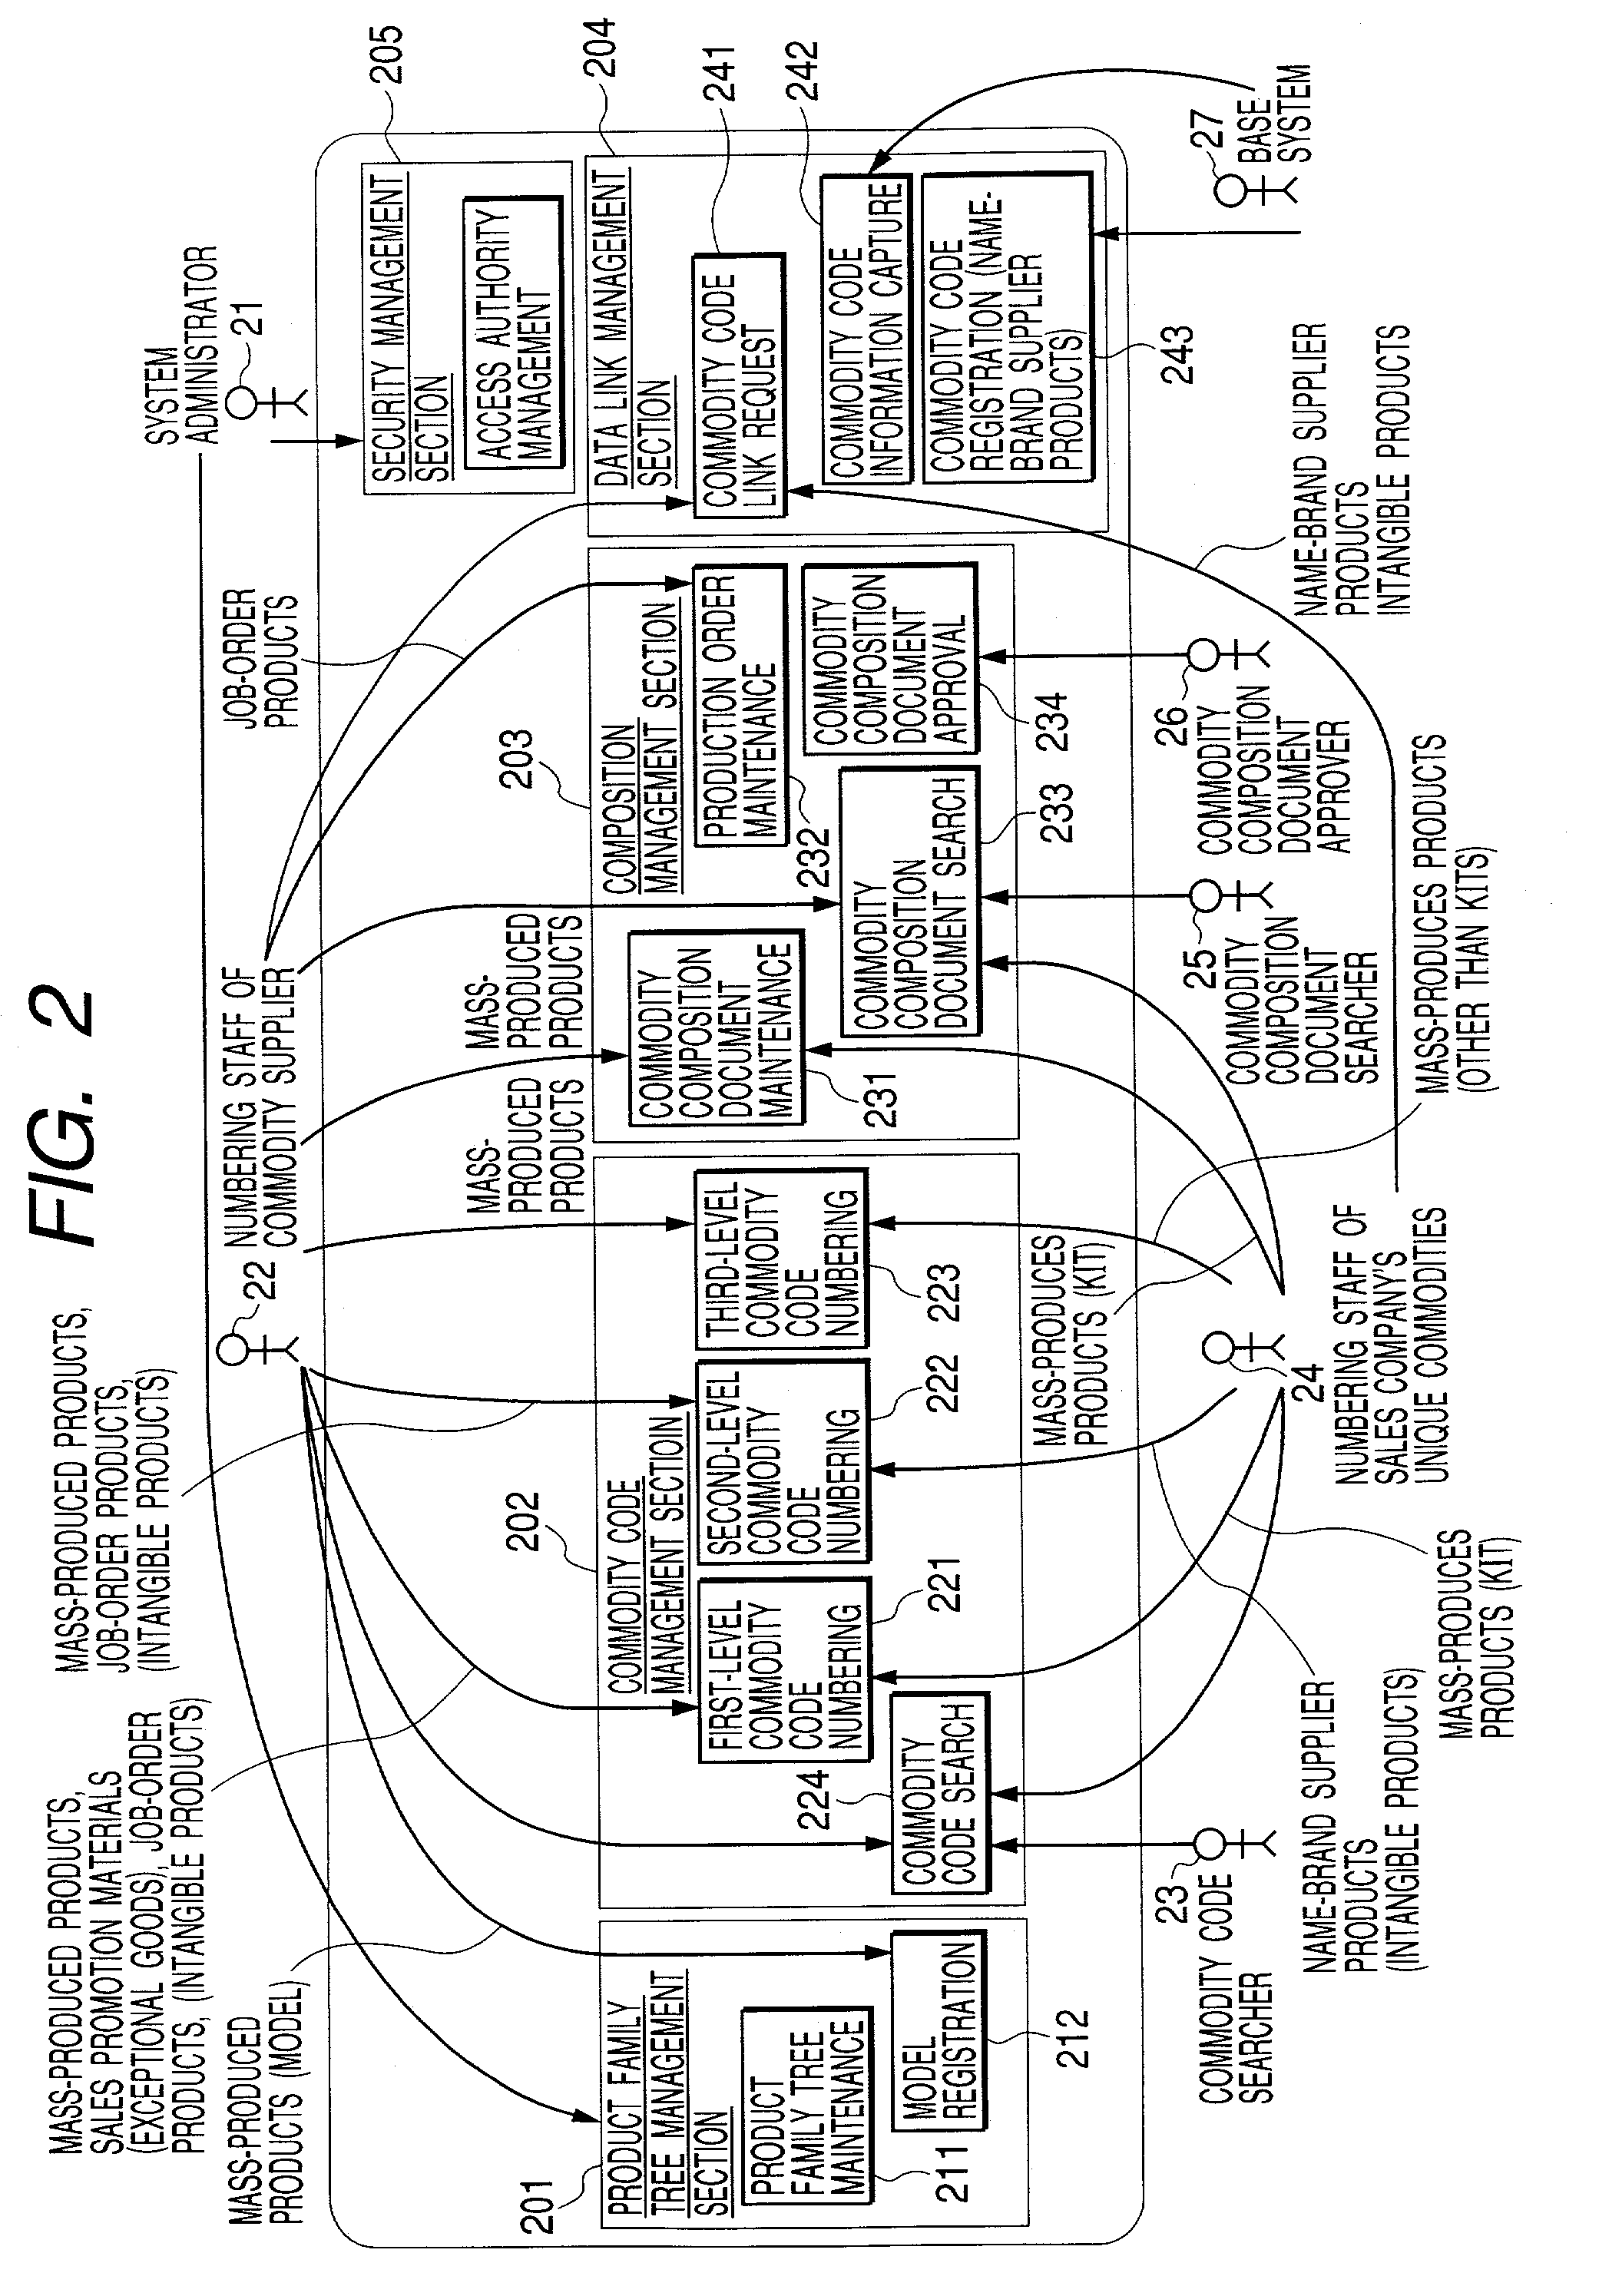 Apparatus for issuing commodity codes for commodity model names